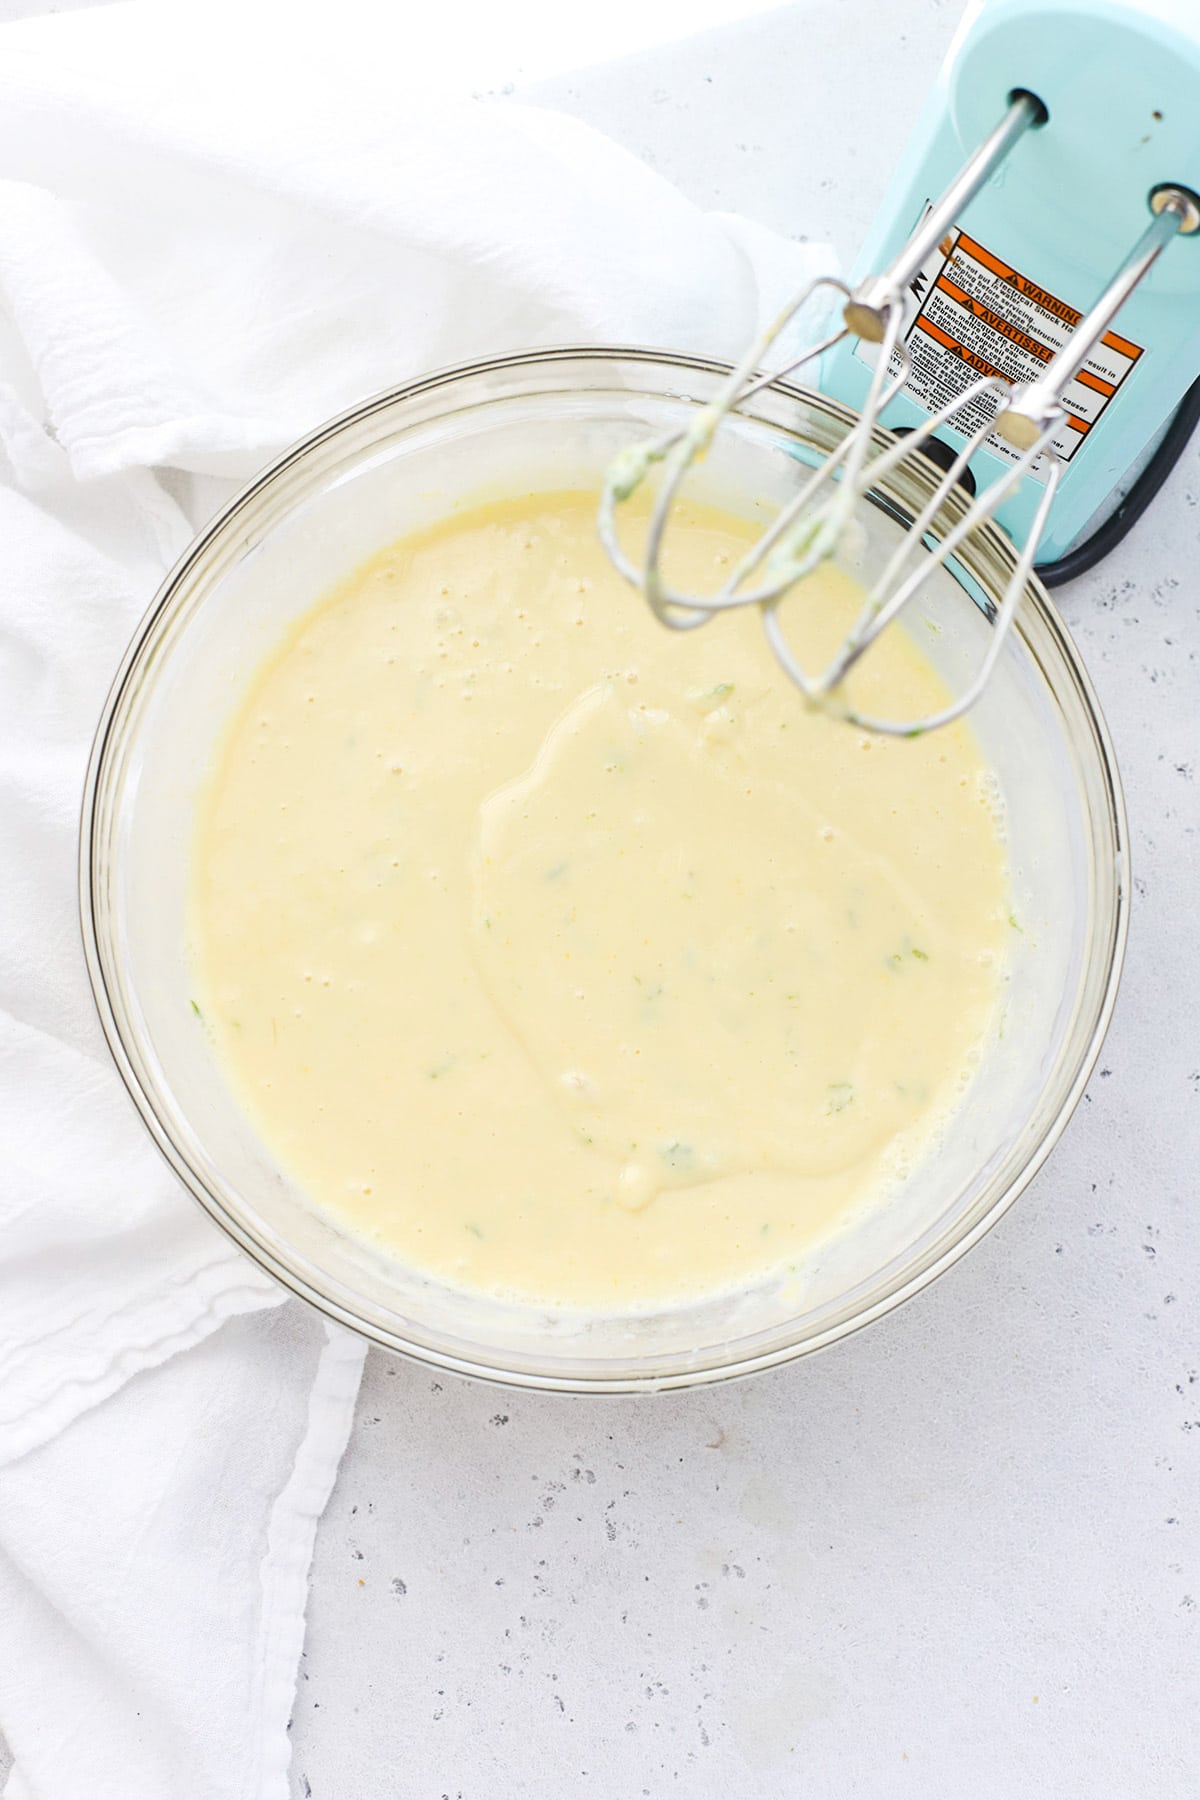 Mixing up gluten-free key lime pie filling